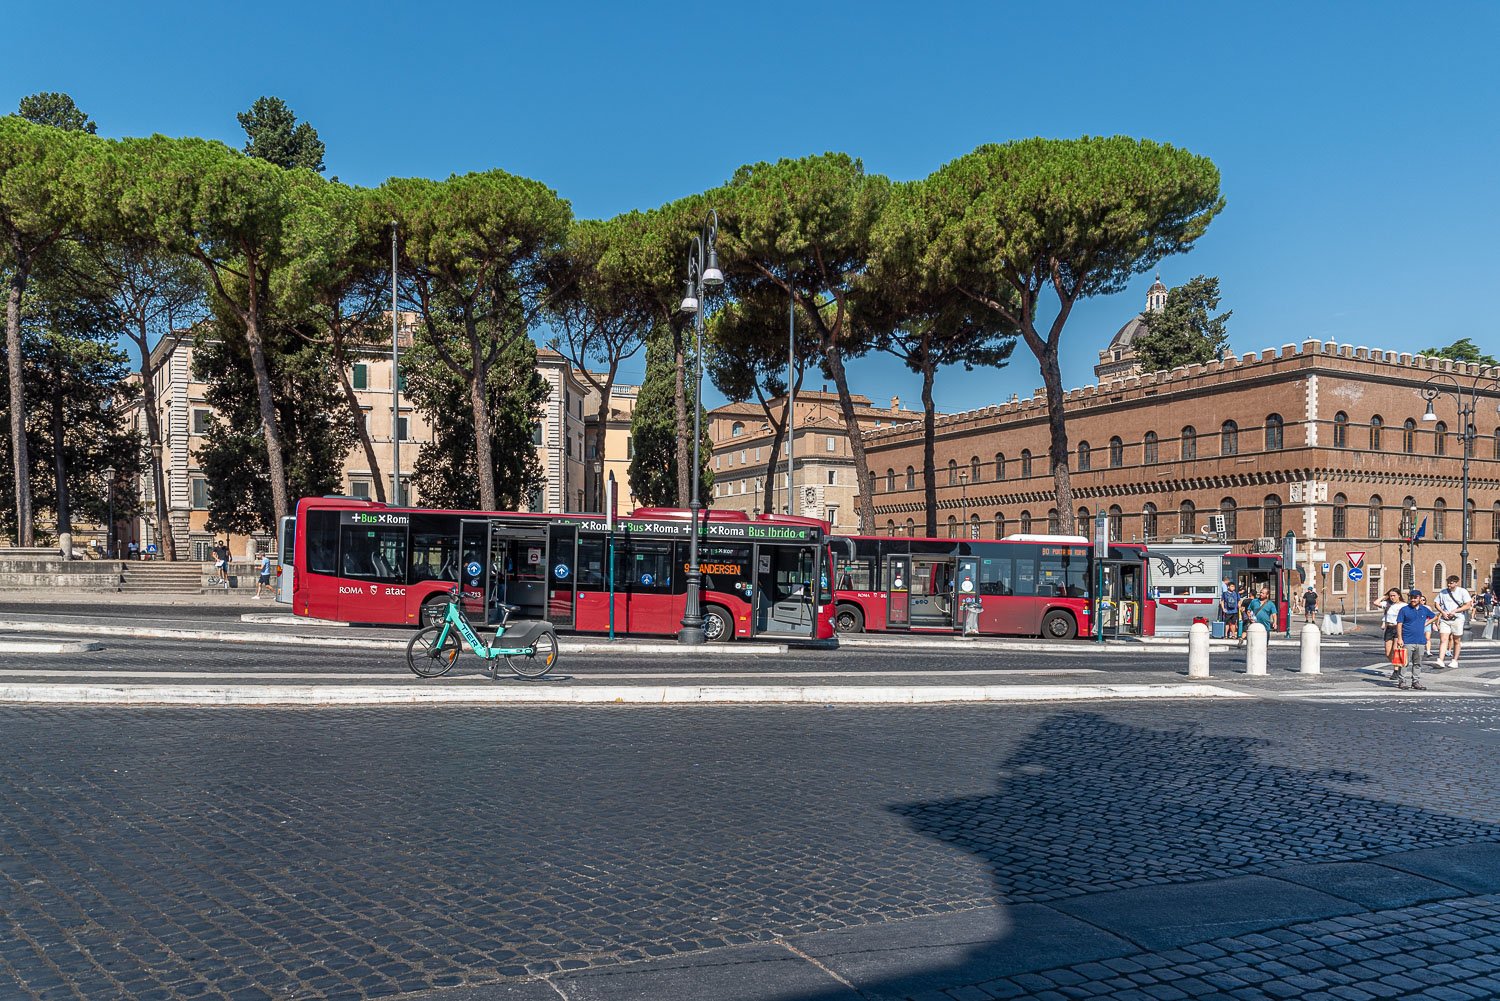 Piazza Venezia History - The Bus Stop in the Piazza